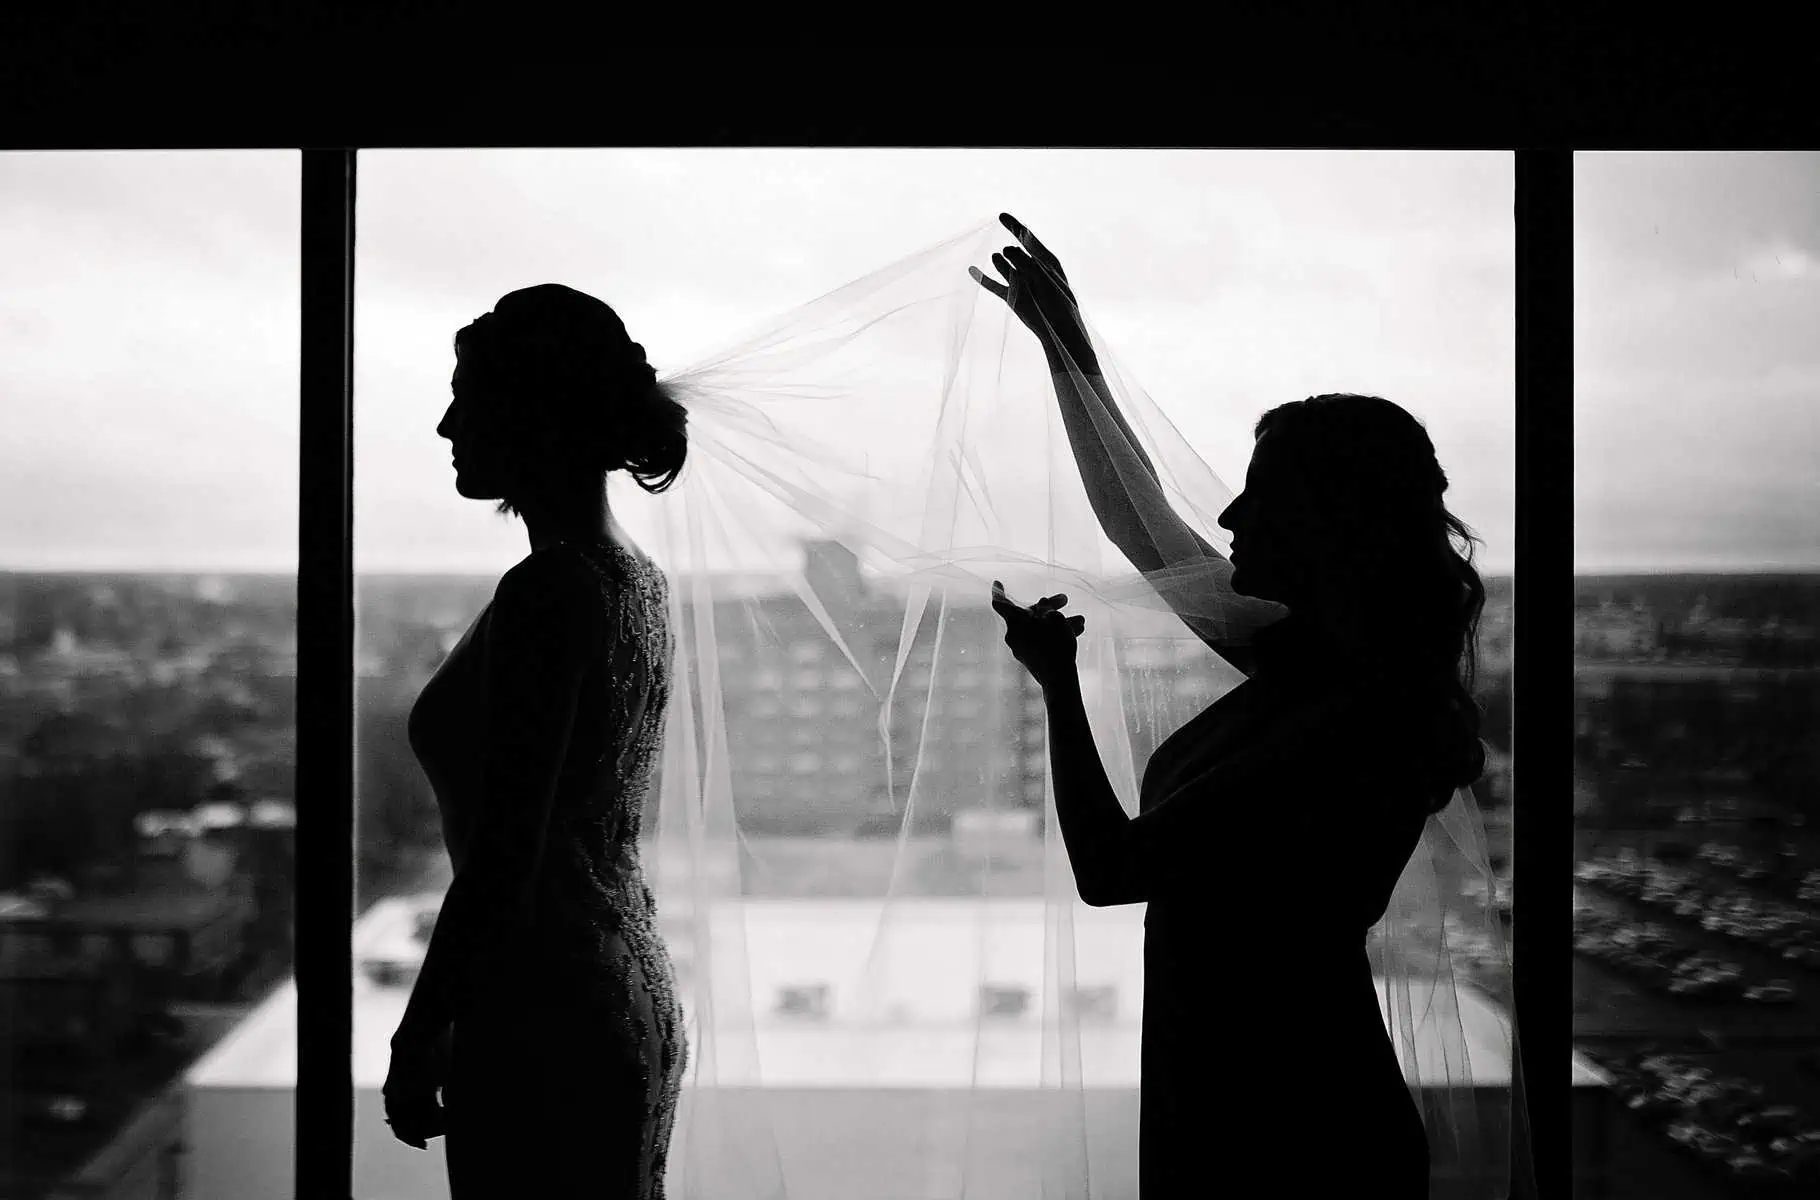 A bride is putting her veil on in front of a window.